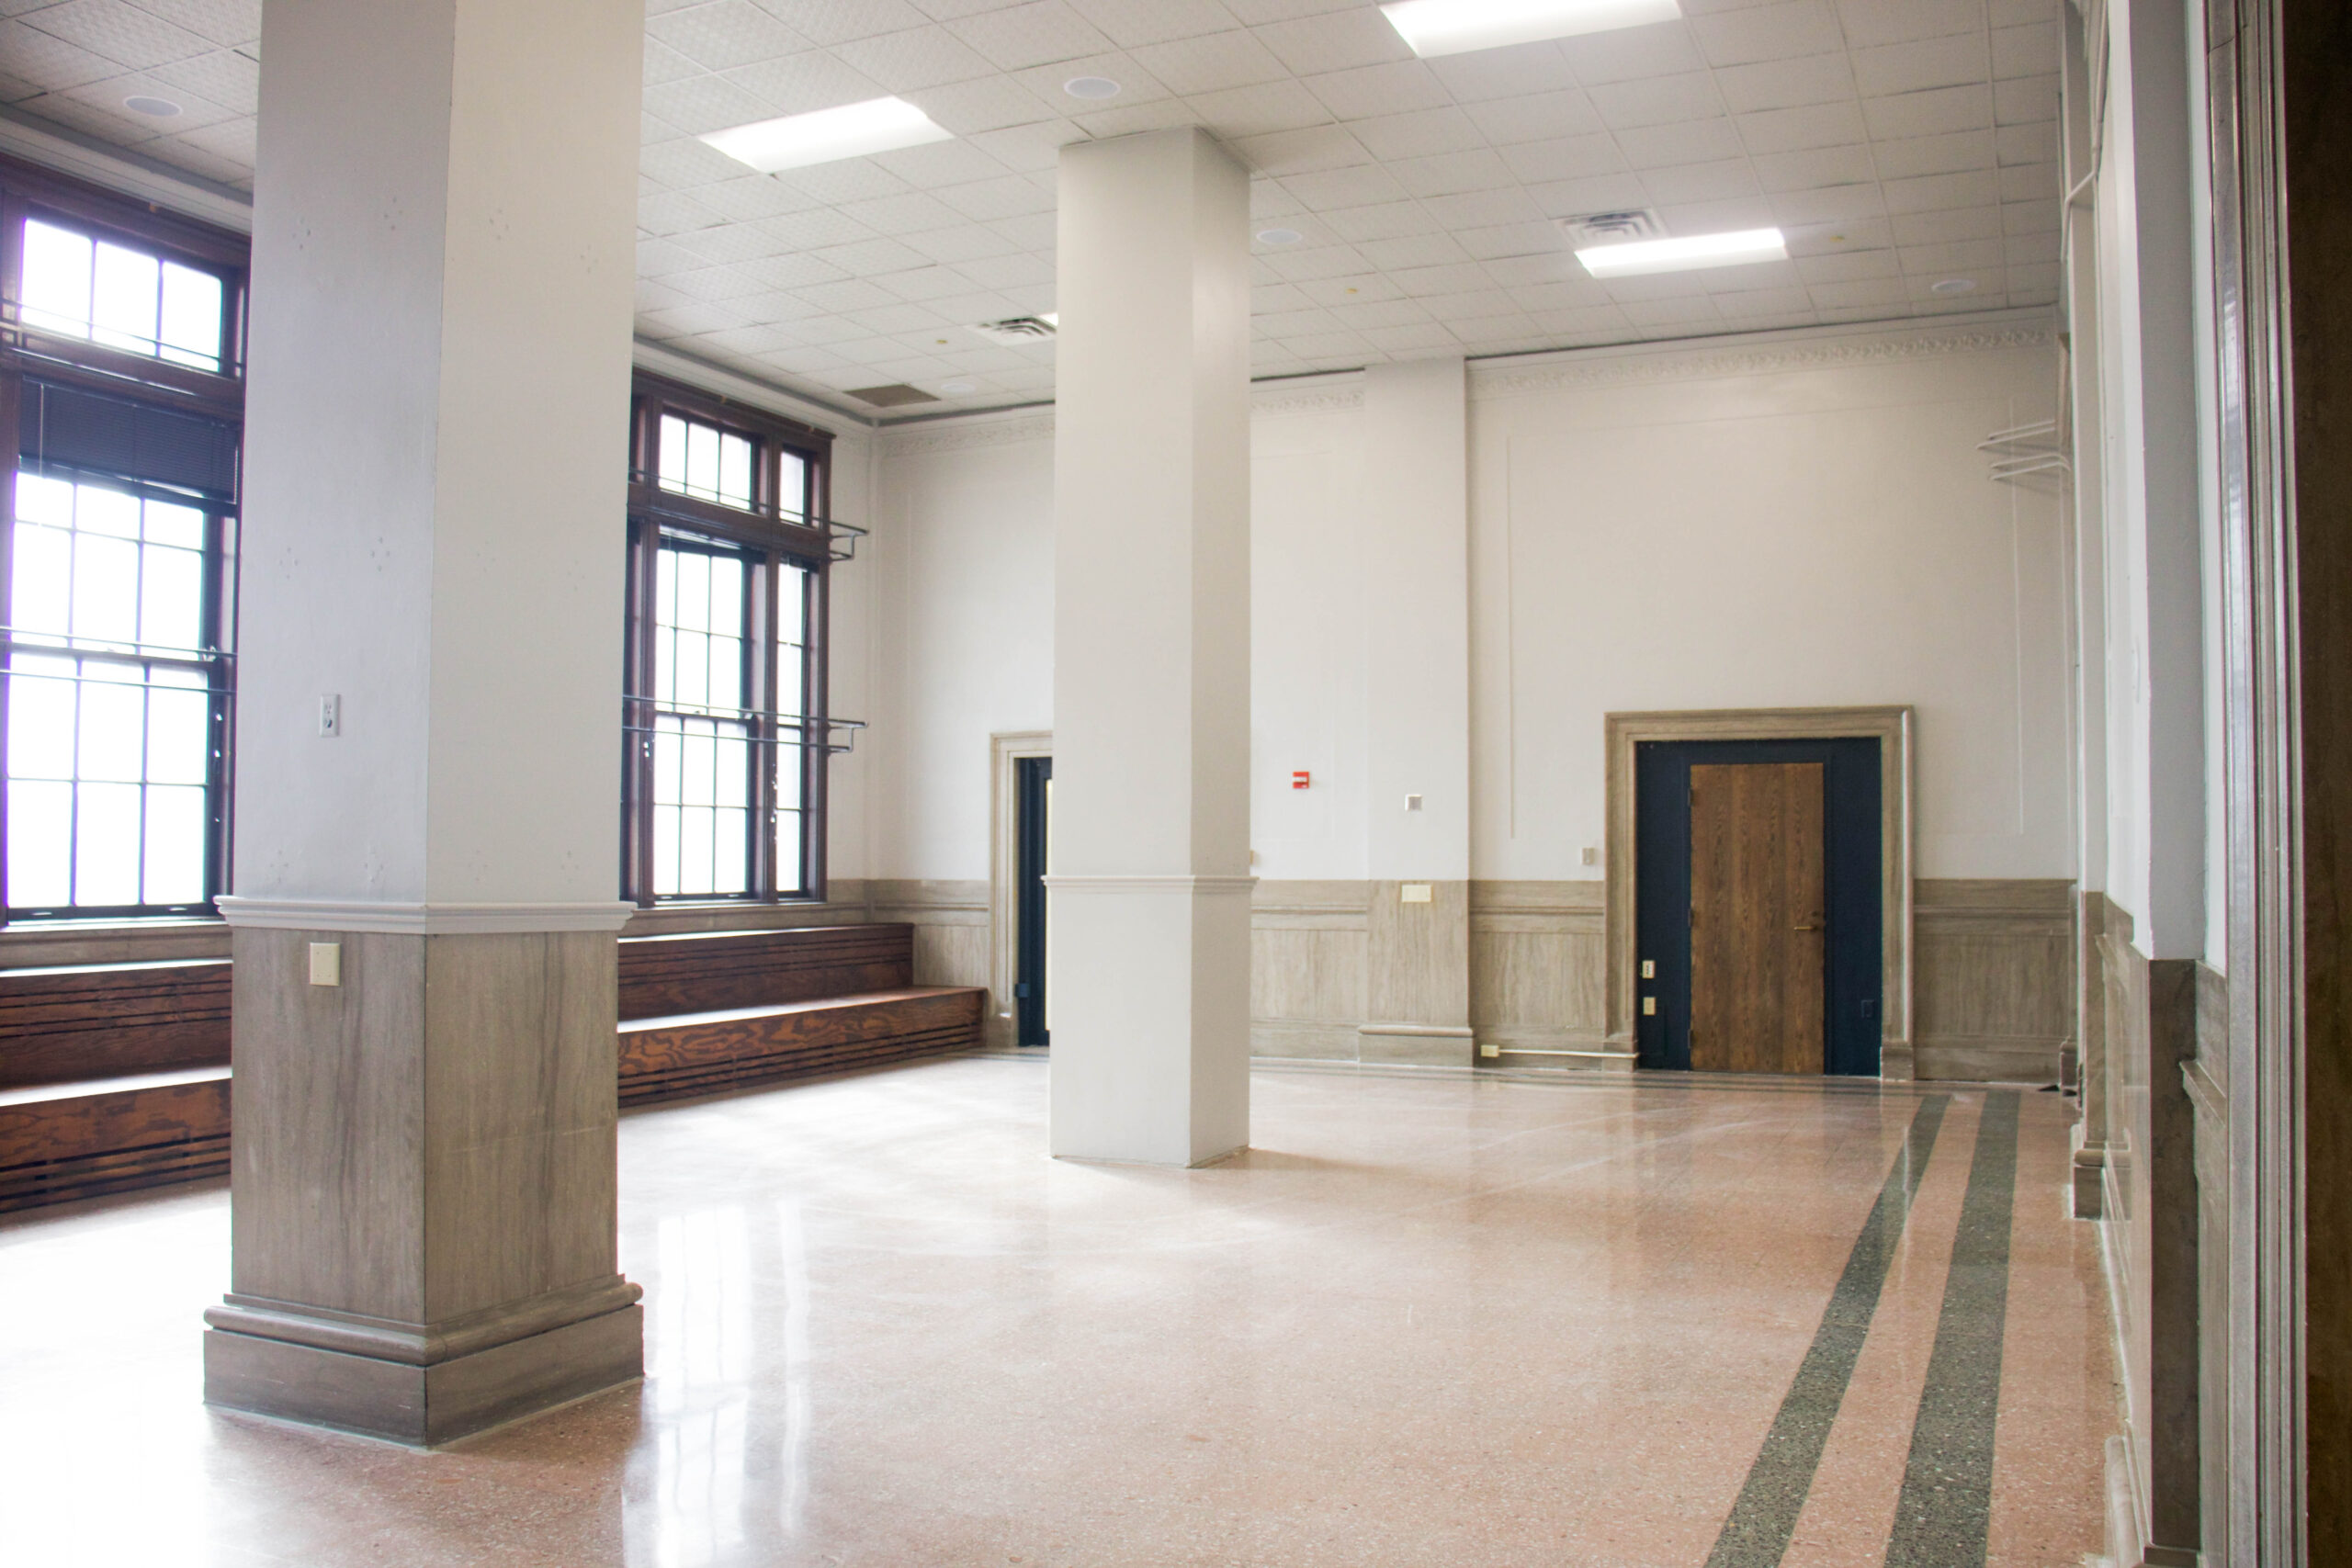 Interior of Suite 160 at Union Depot